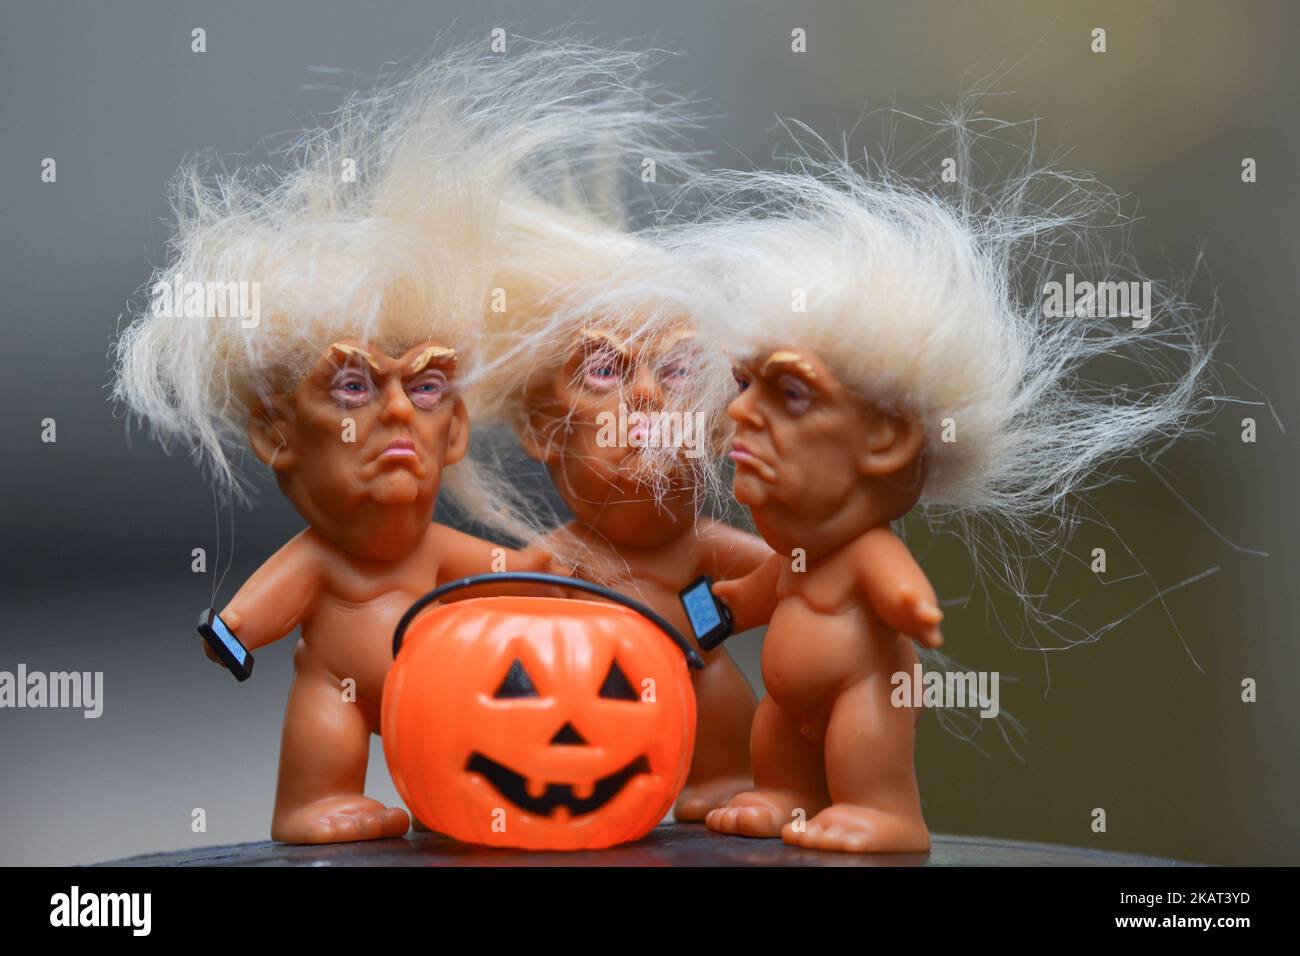 Three vinyl dolls which feature President Donald Trump, made by a former sculptor for Disney, Chuck Williams, can be seen and bought at Balla Ban Art Gallery in Dublin city center, ahead of Halloween. On Wednesday, 24 October 2017, in Dublin, Ireland. Photo by Artur Widak  Stock Photo